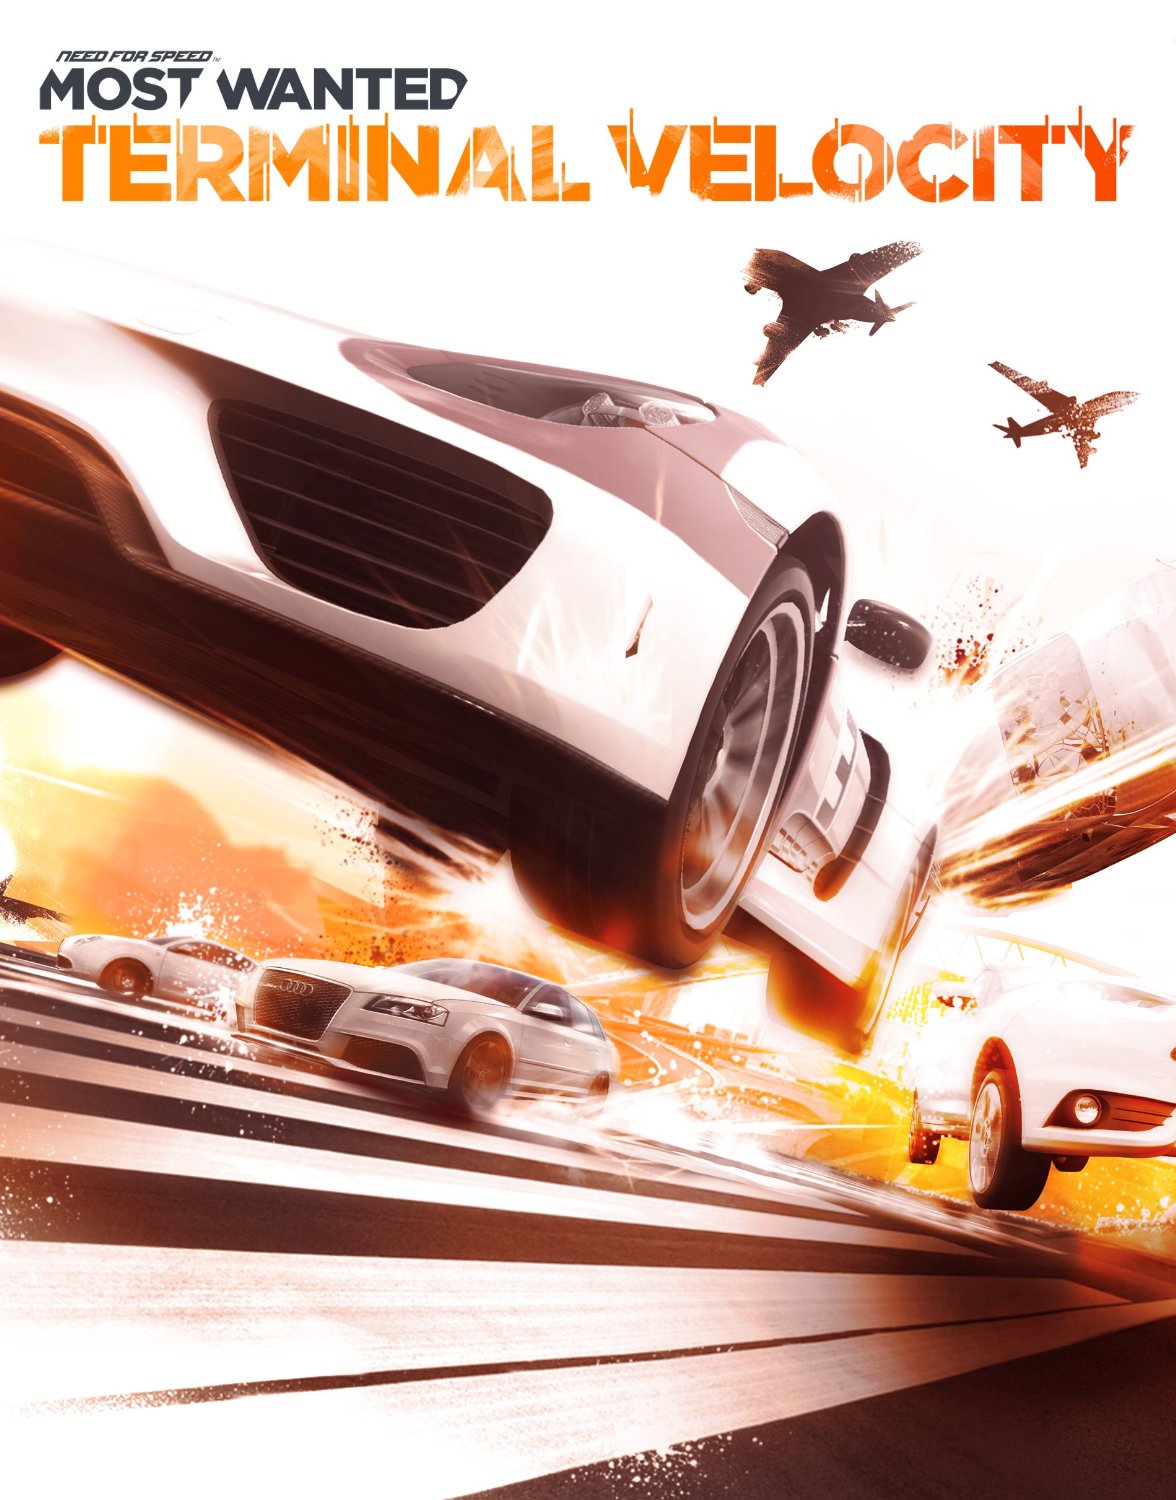 Need for speed most wanted 2012 terminal velocity pack download free